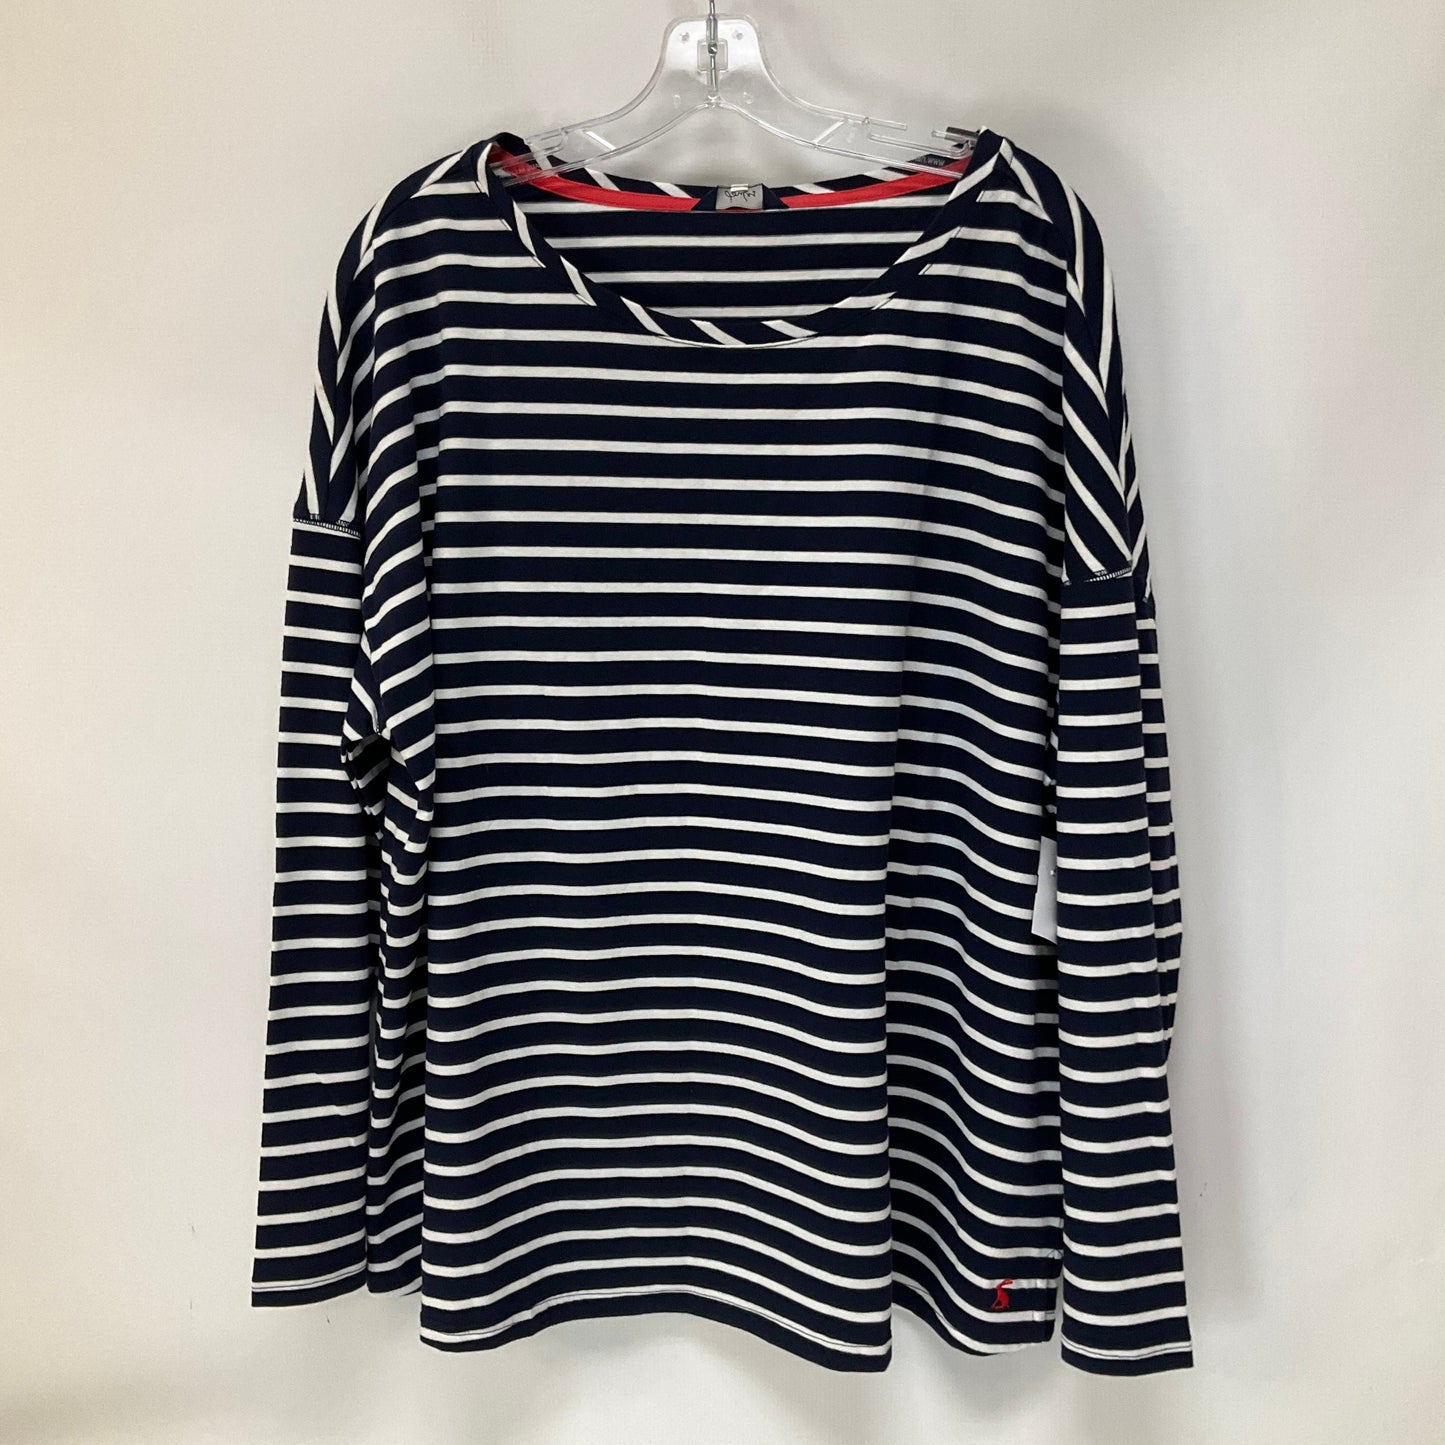 Striped Pattern Top Long Sleeve Joules, Size 14